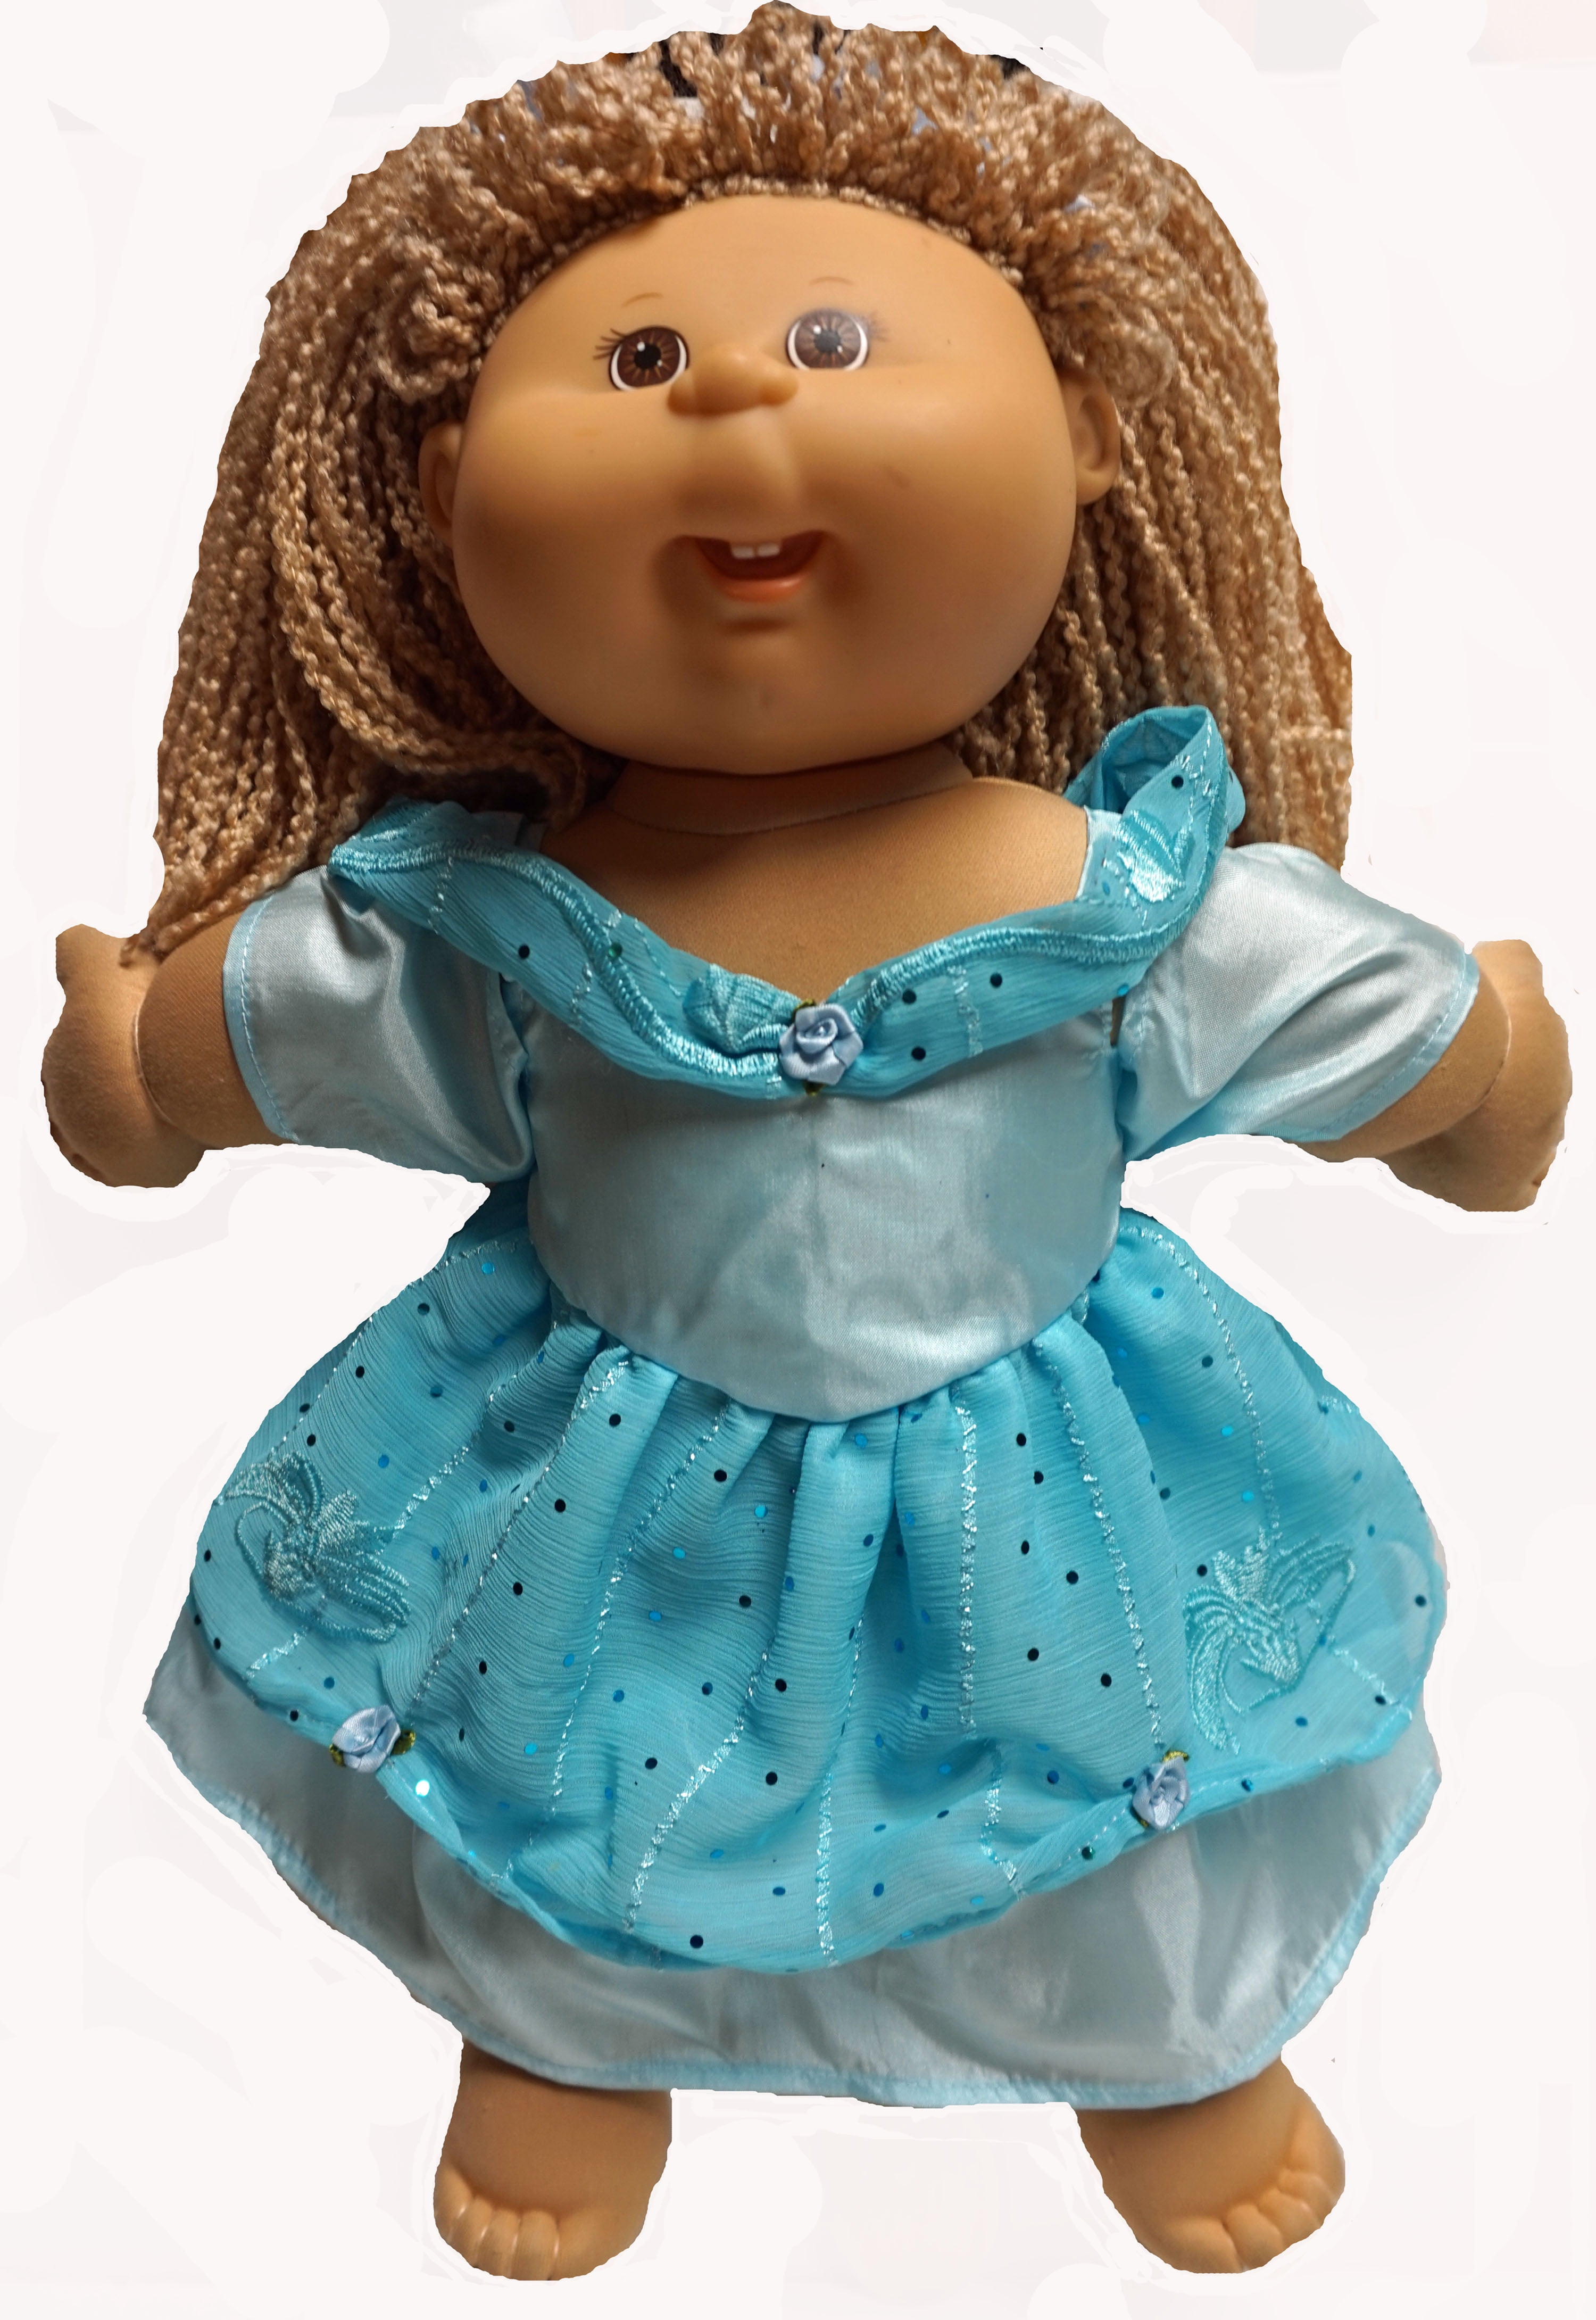 Doll Clothes Superstore Cabbage Patch Kid Doll Clothes And 1516 Inch Baby Dolls Blue Princess